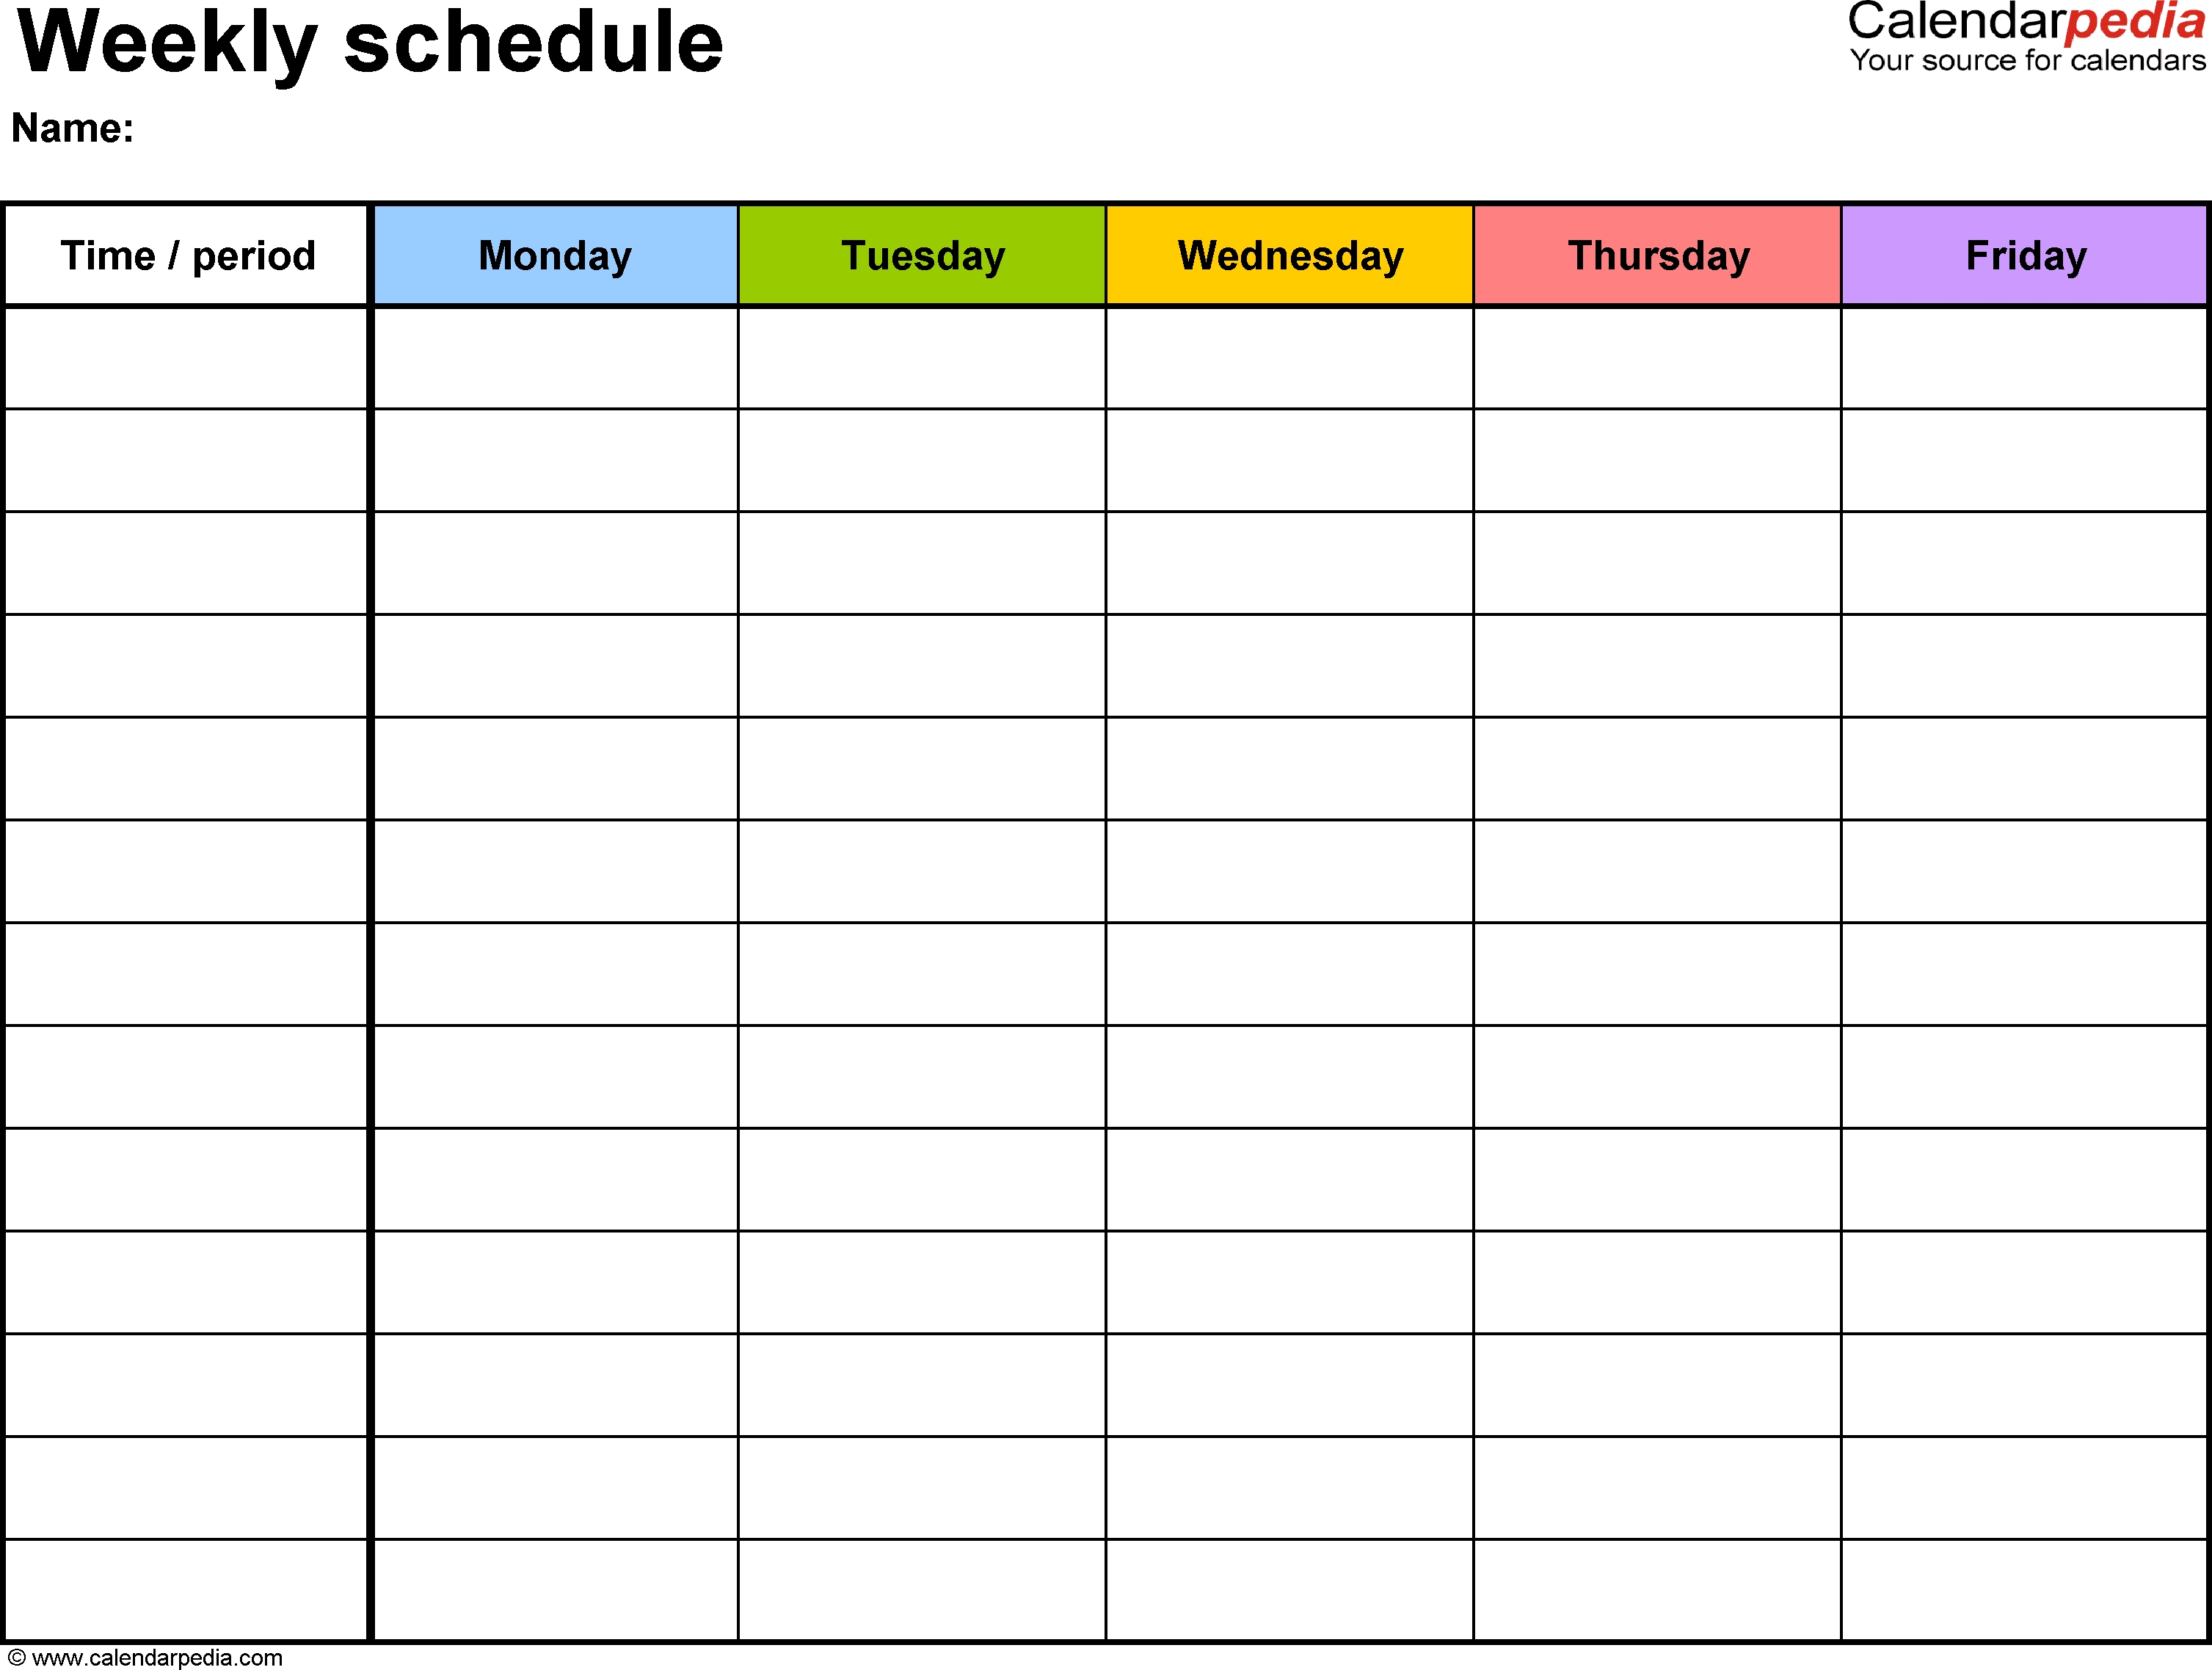 Free Weekly Schedule Templates For Pdf - 18 Templates Blank Monthly Planner No Dates